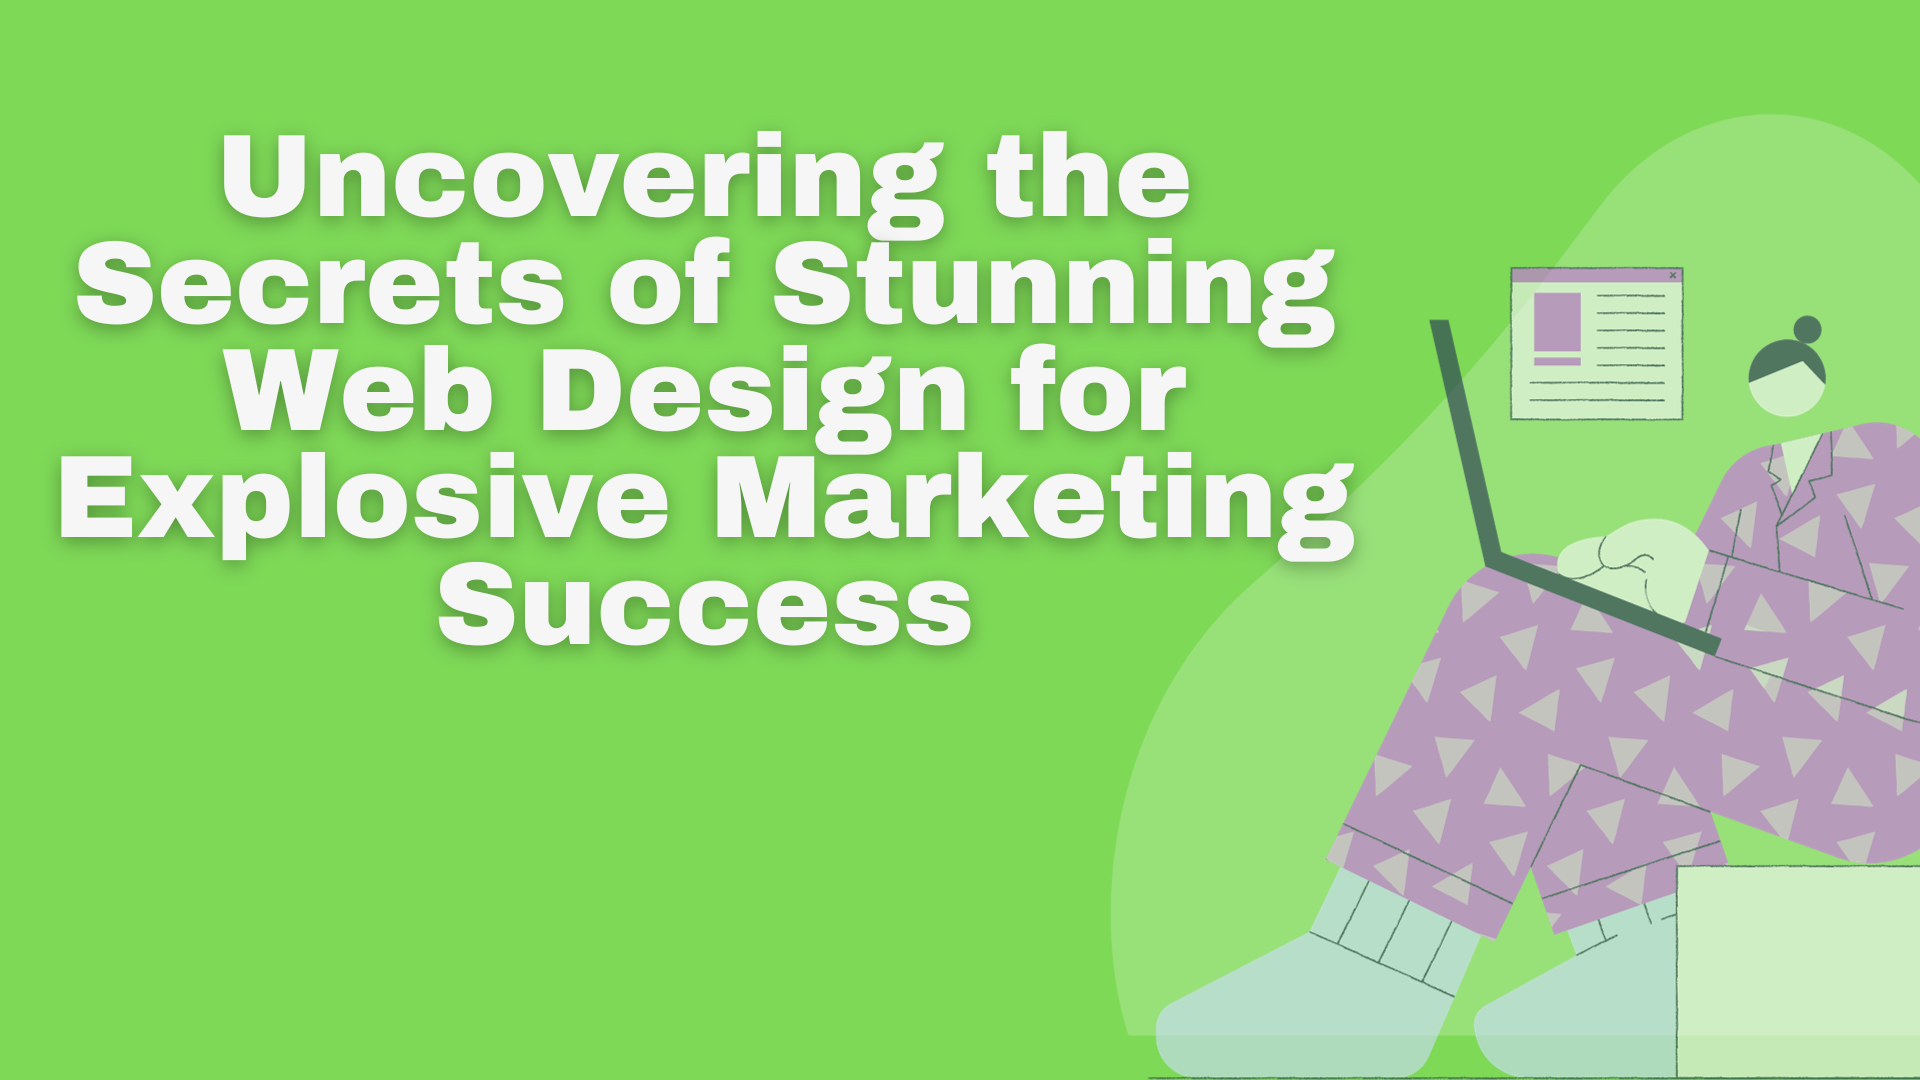 Uncovering the Secrets of Stunning Web Design for Explosive Marketing Success